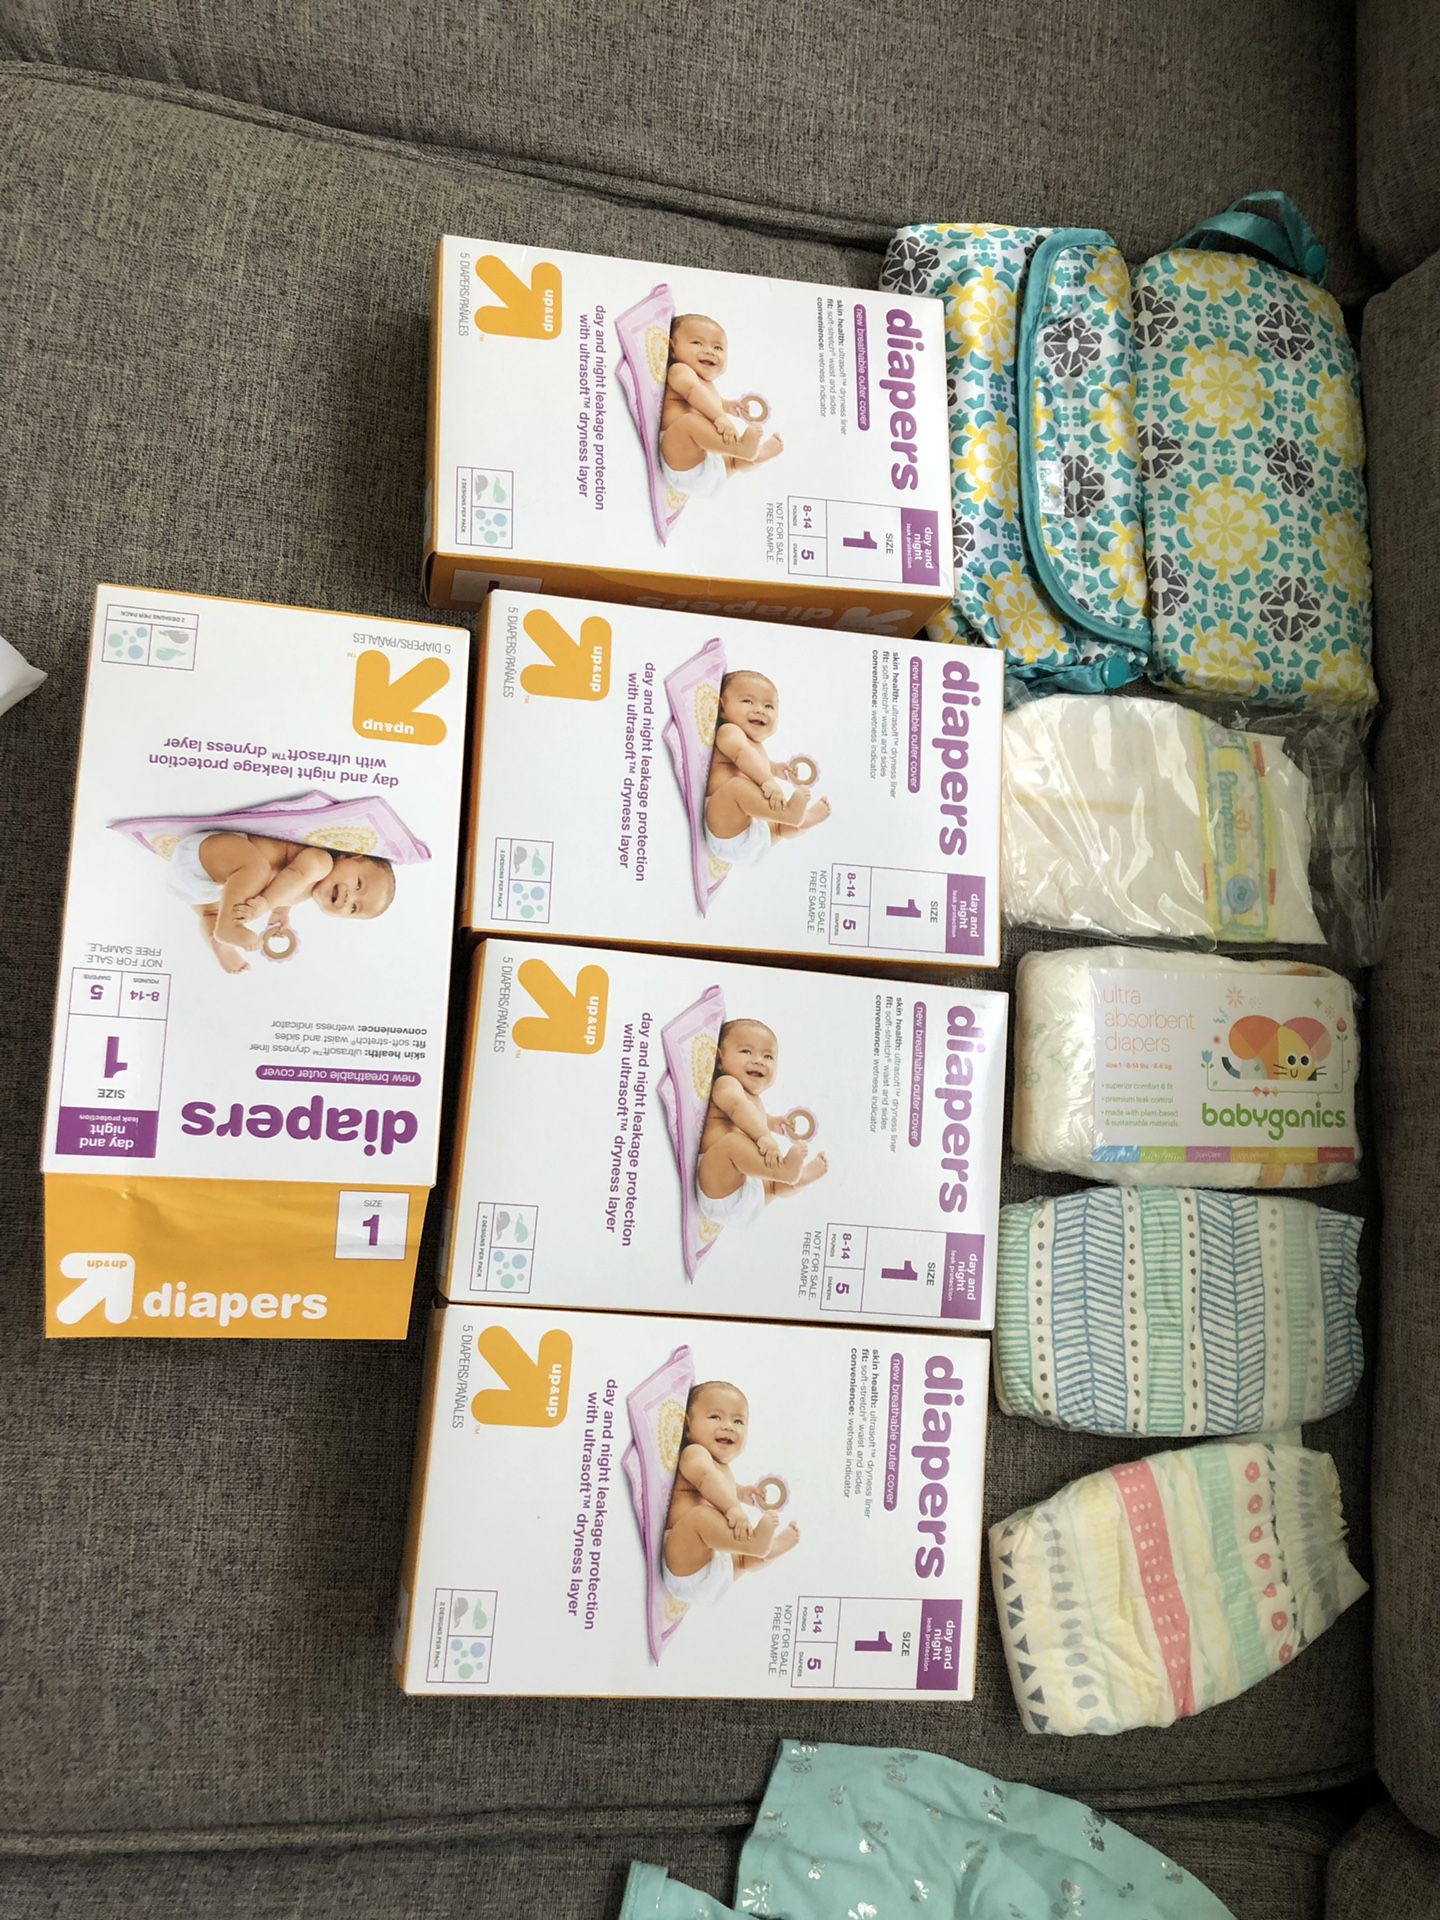 Baby bundle-newborn diapers samples (target brand and honest )large bag of baby clothes, changing pad with covers etc